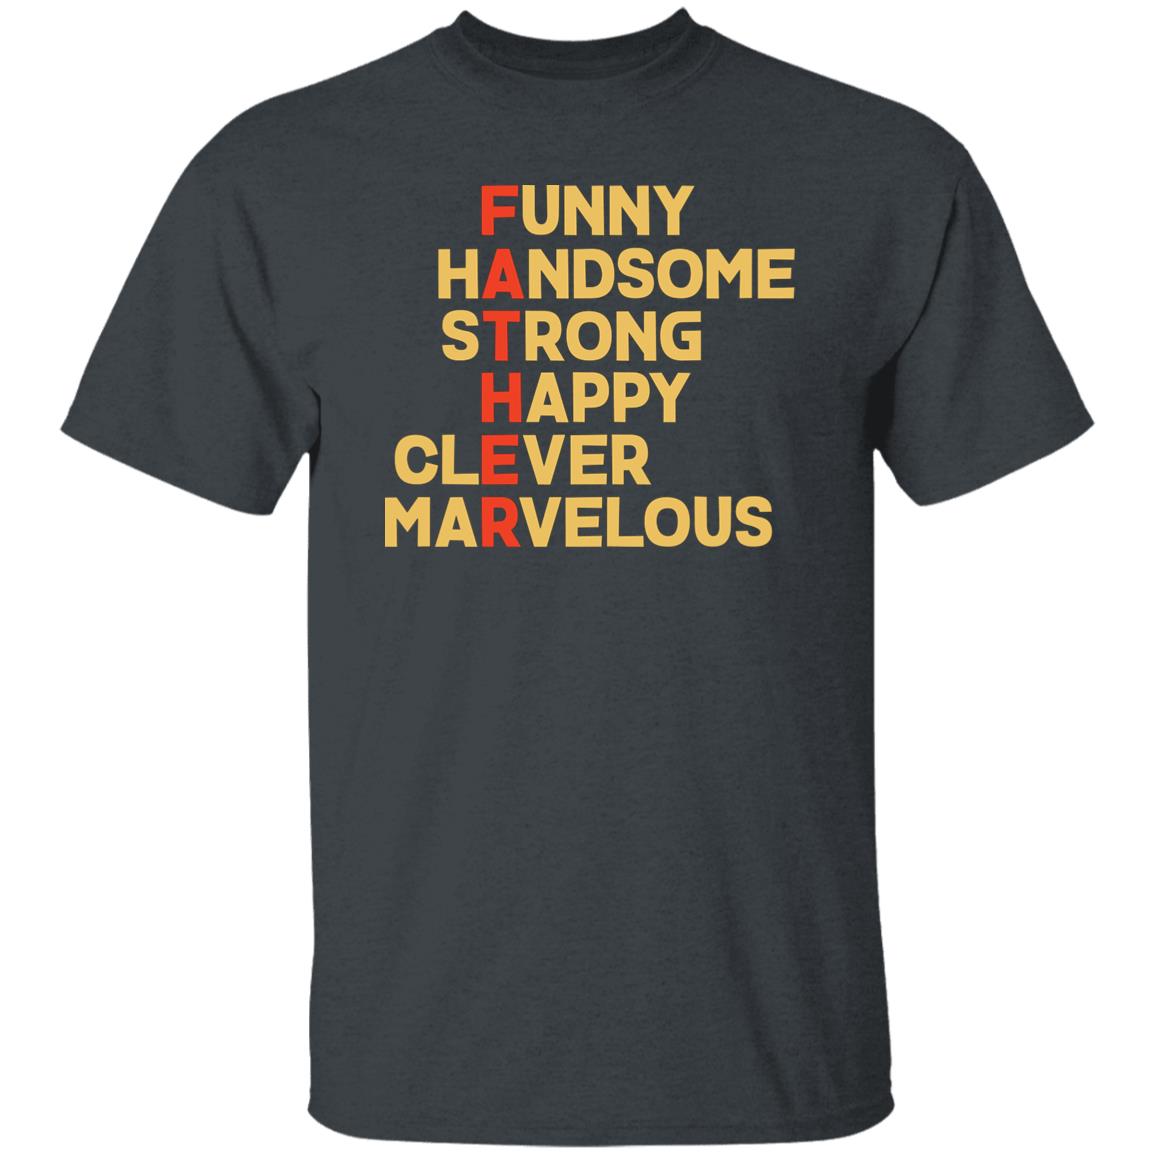 Funny Handsome Marvelous Father's Day Gift Tshirt